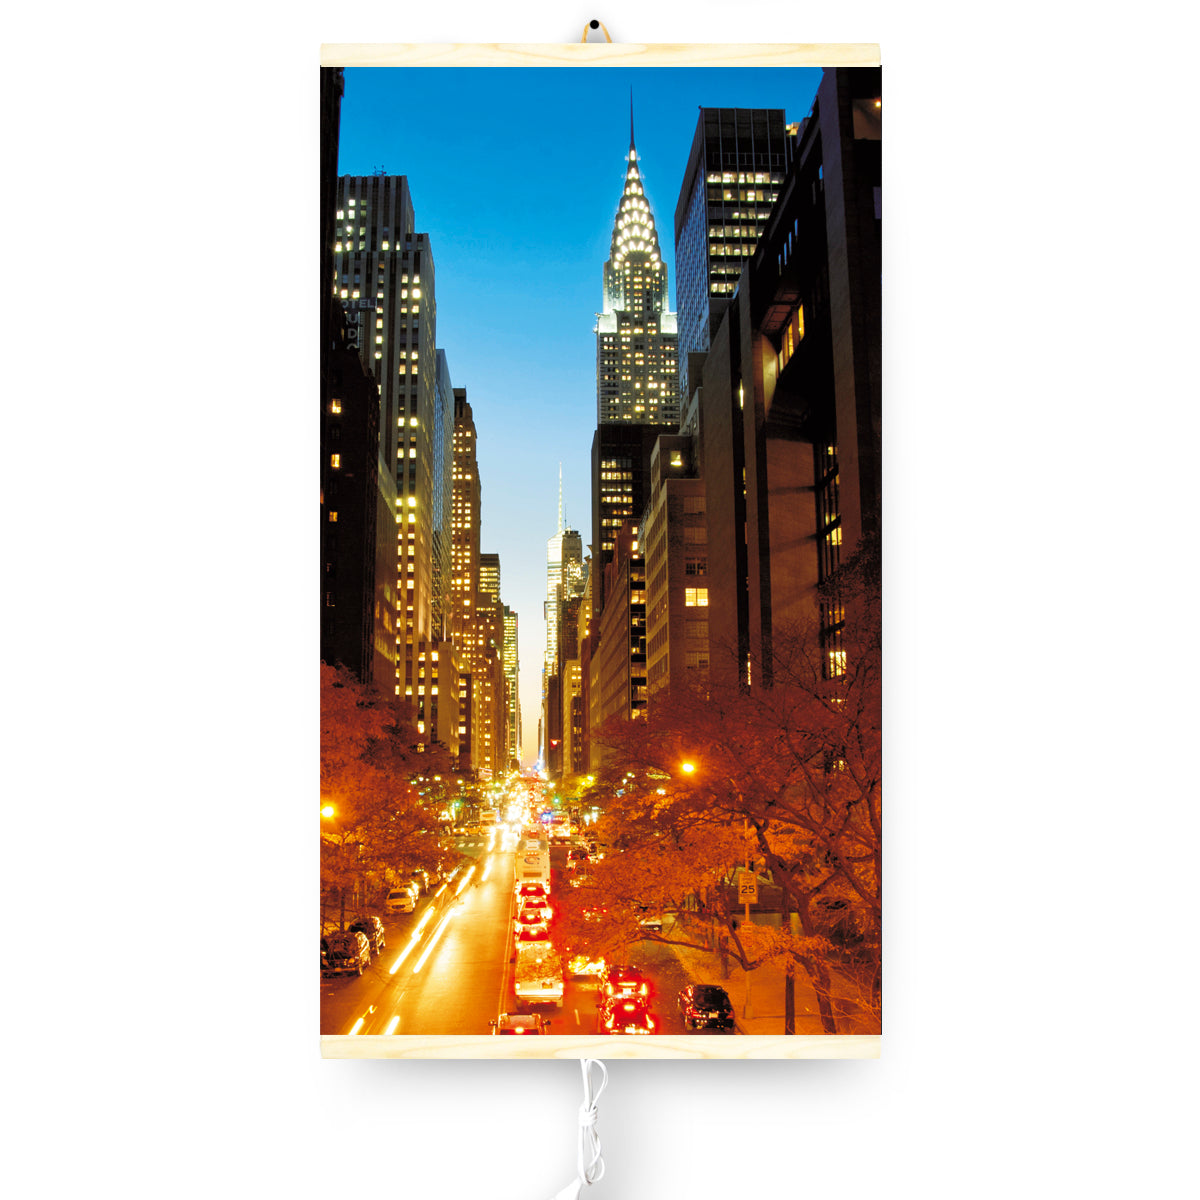 Infrared Wall mounted  Picture Heater. Far Infrared Heating Panel 420W "Manhattan"